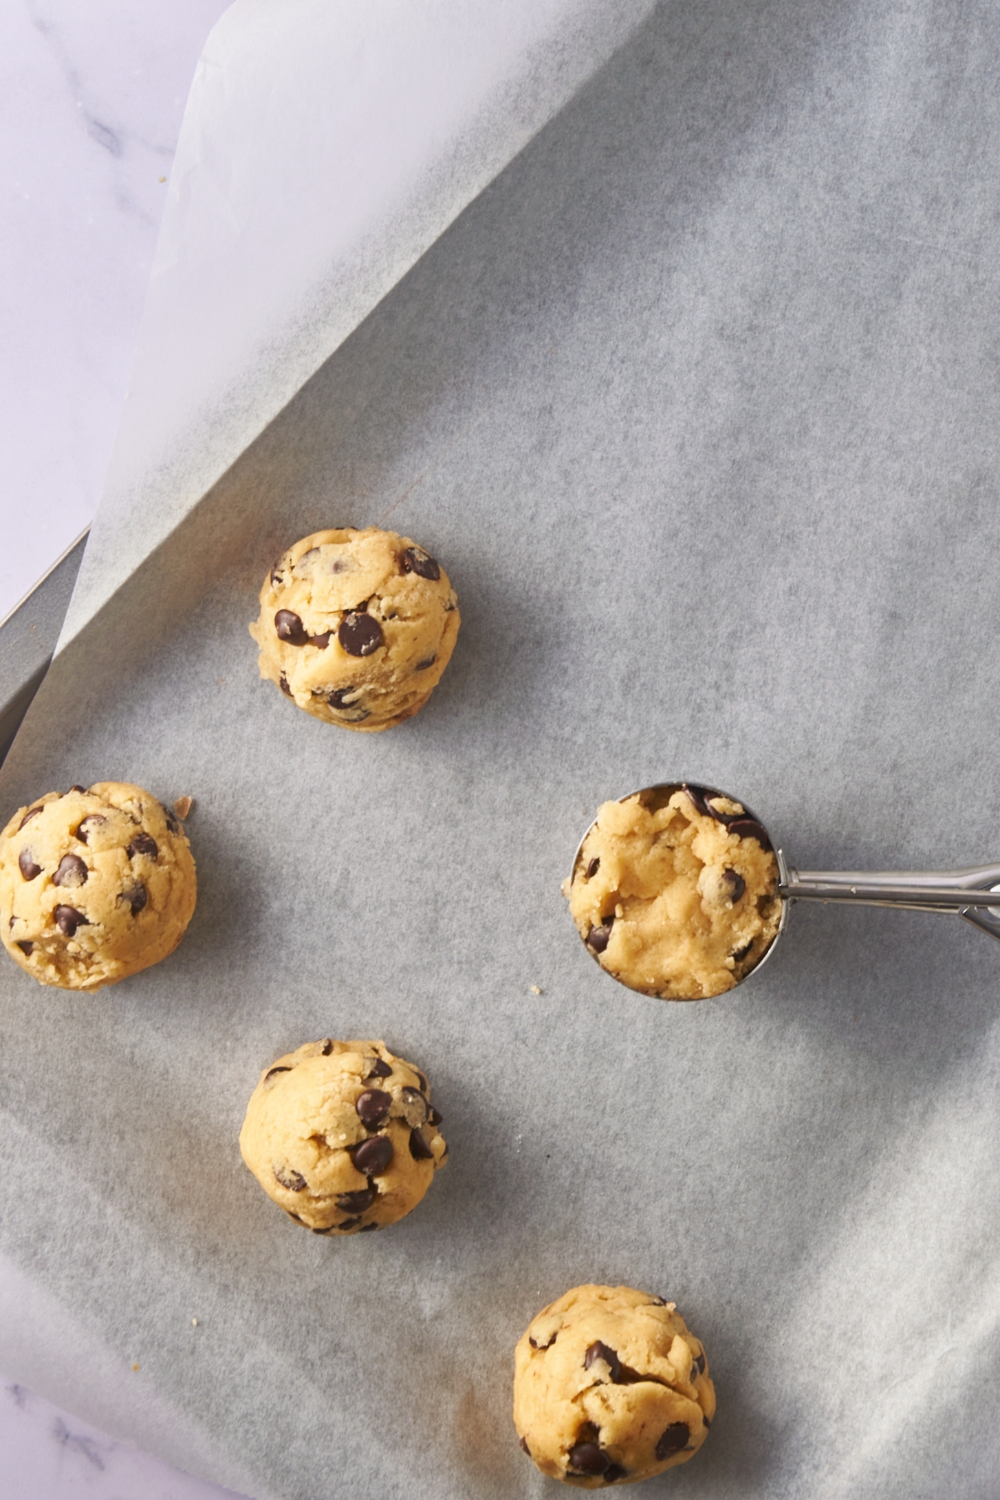 Cookie dough balls being portioned with an ice cream scoop onto a baking sheet lined with parchment paper.